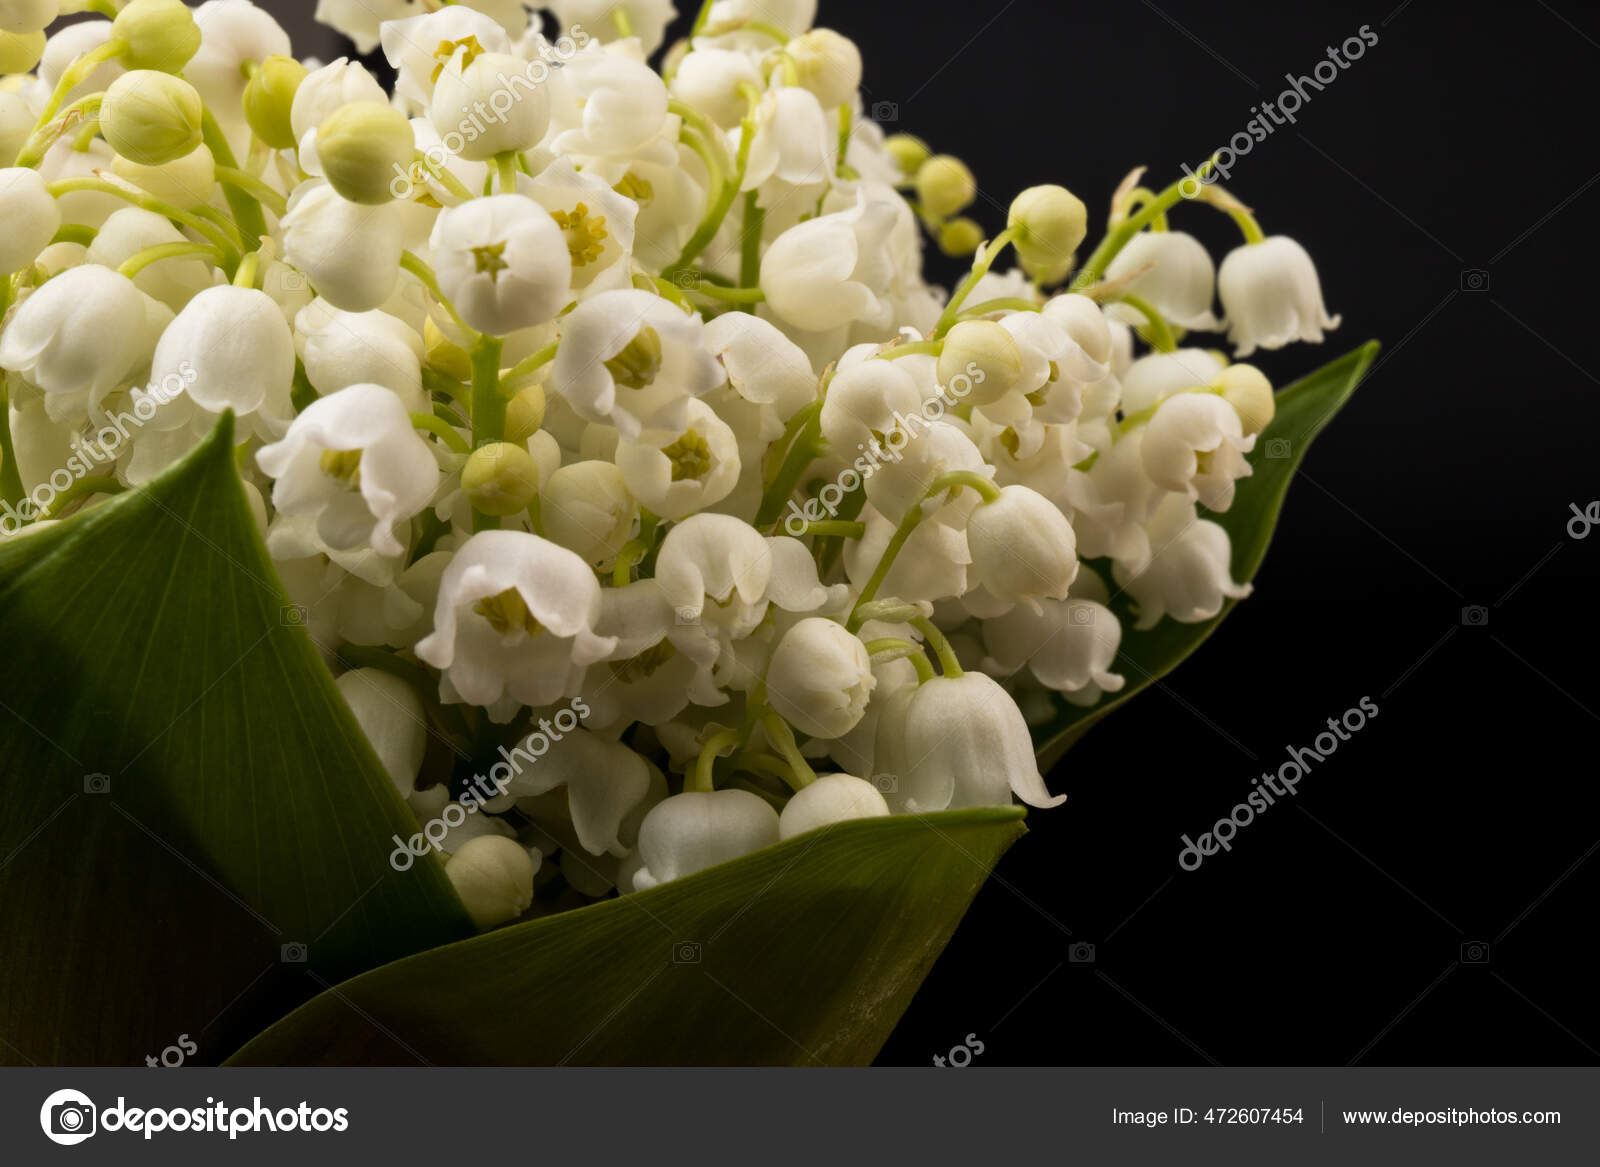 Convallaria majalis (Lily of the Valley, Lily-of-the-valley)